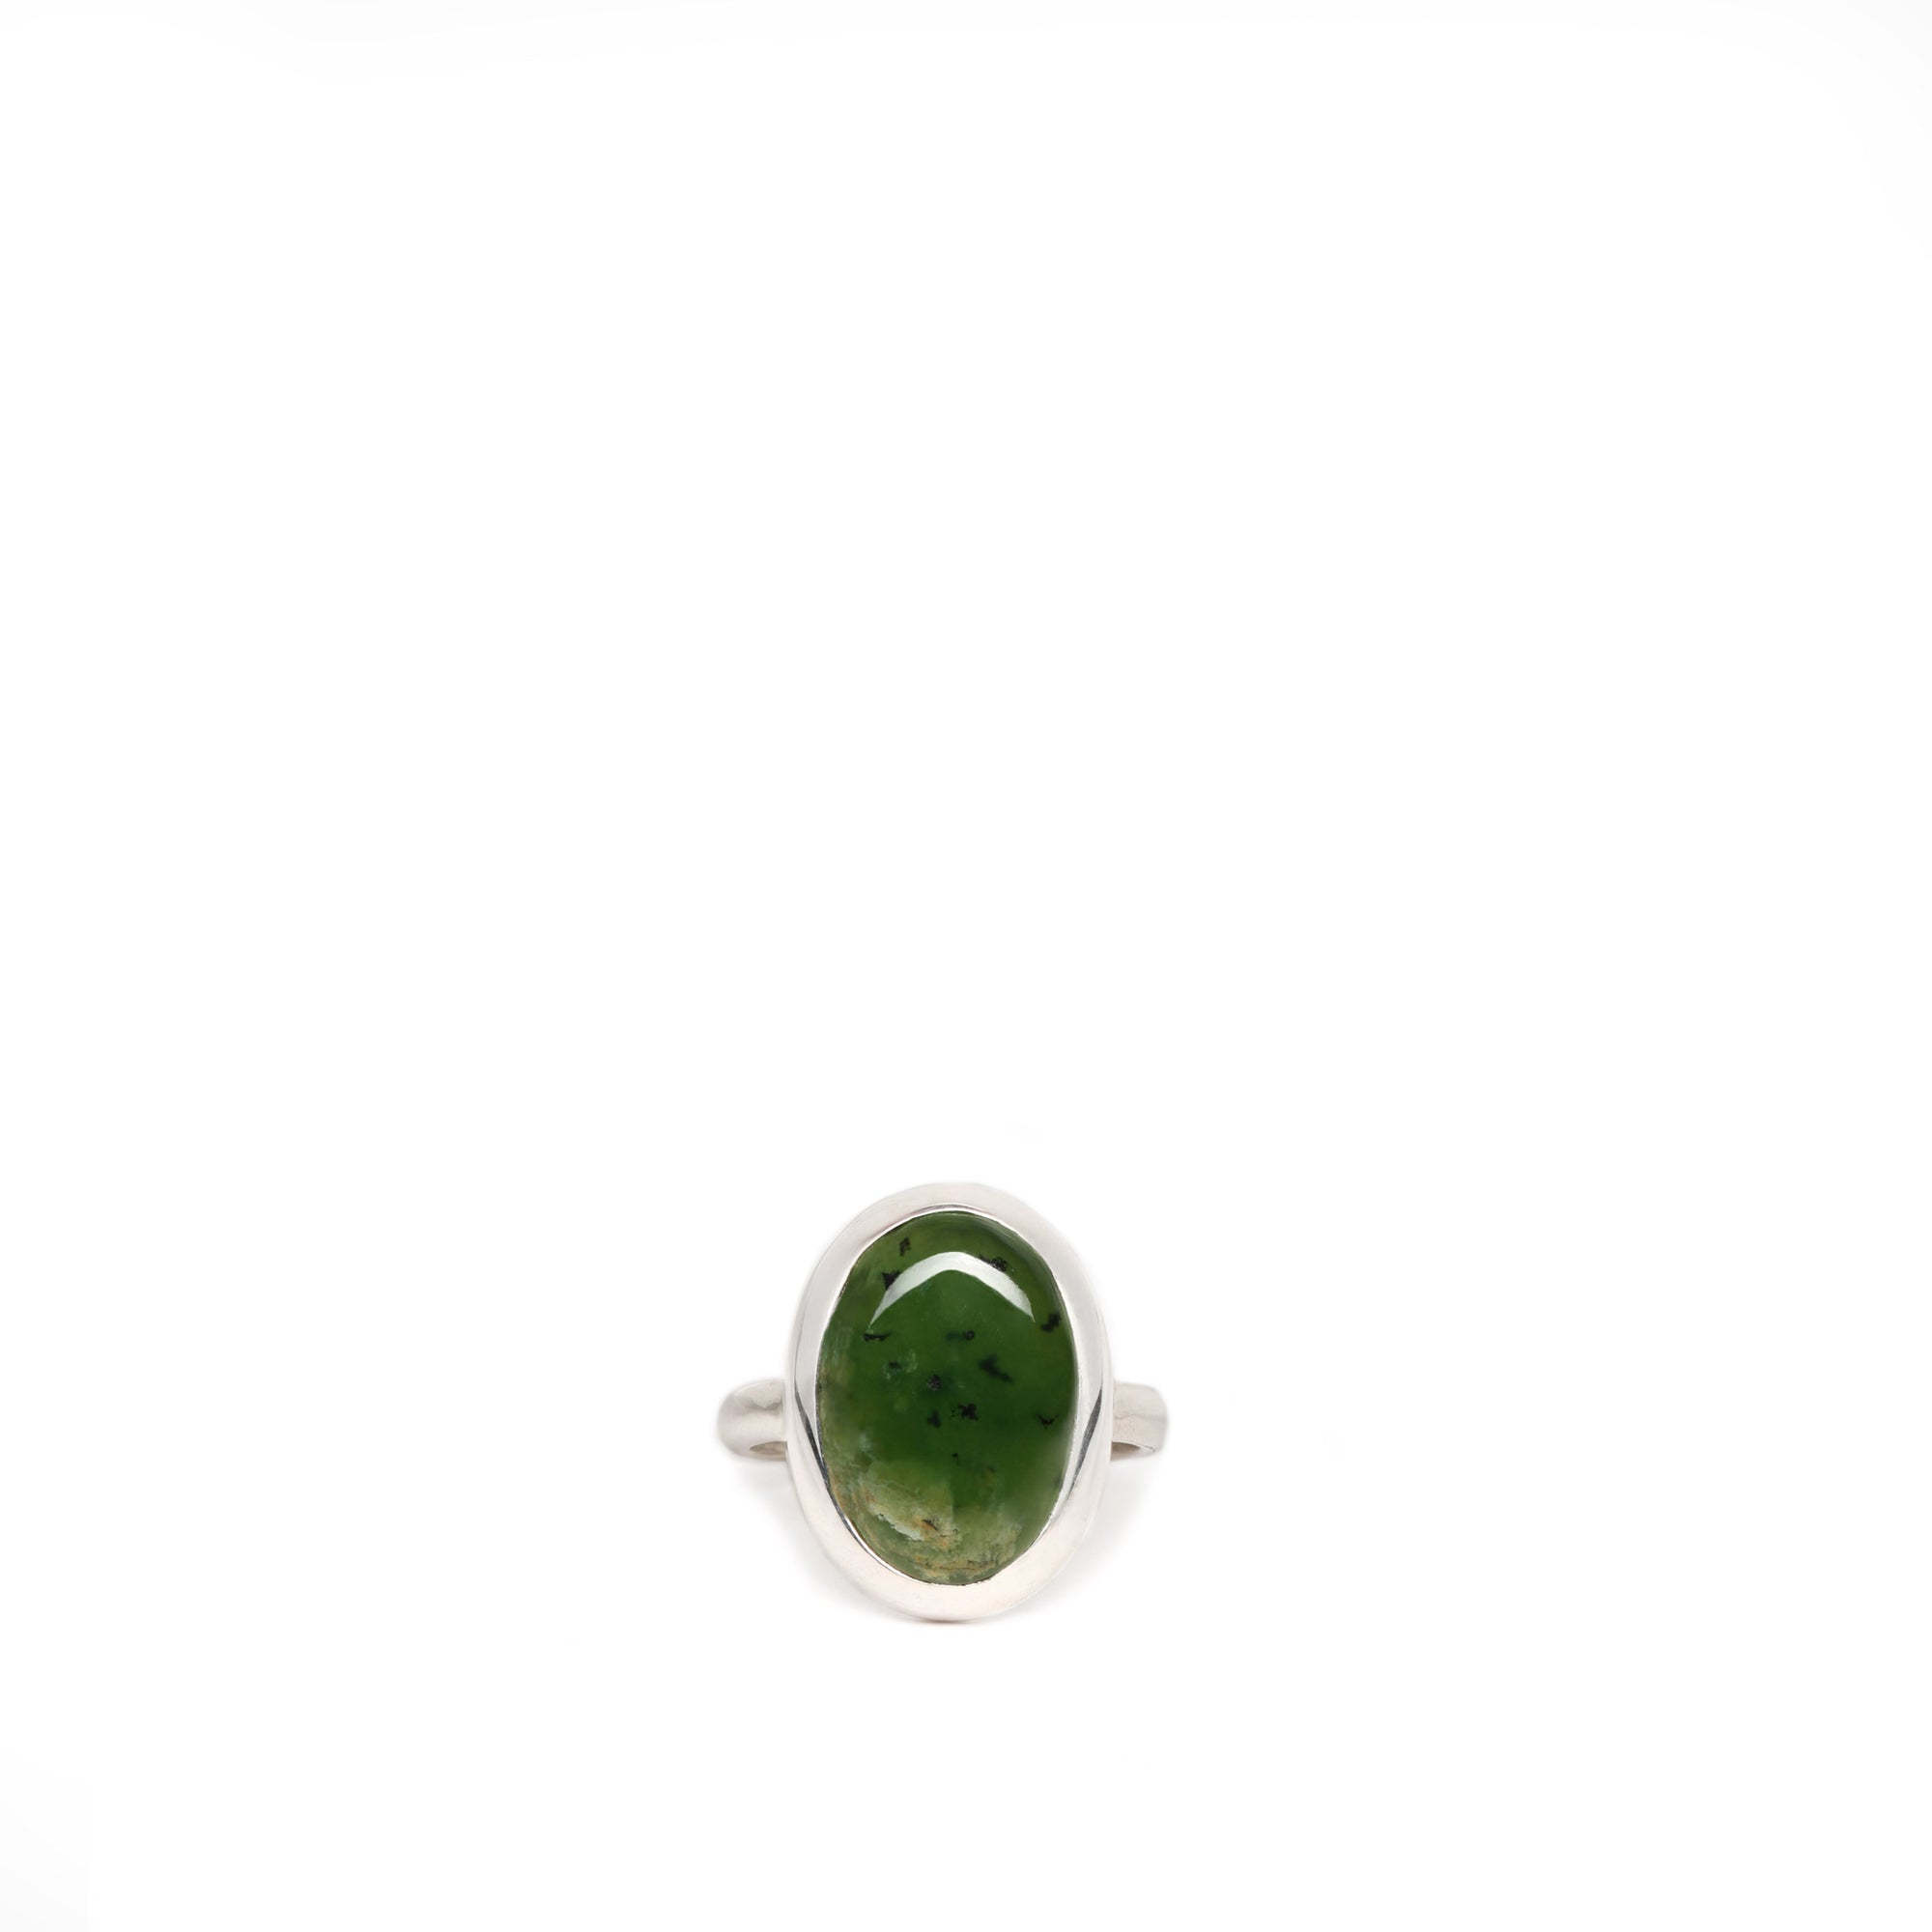 New Zealand Jade Sterling Silver Ring - Size M½